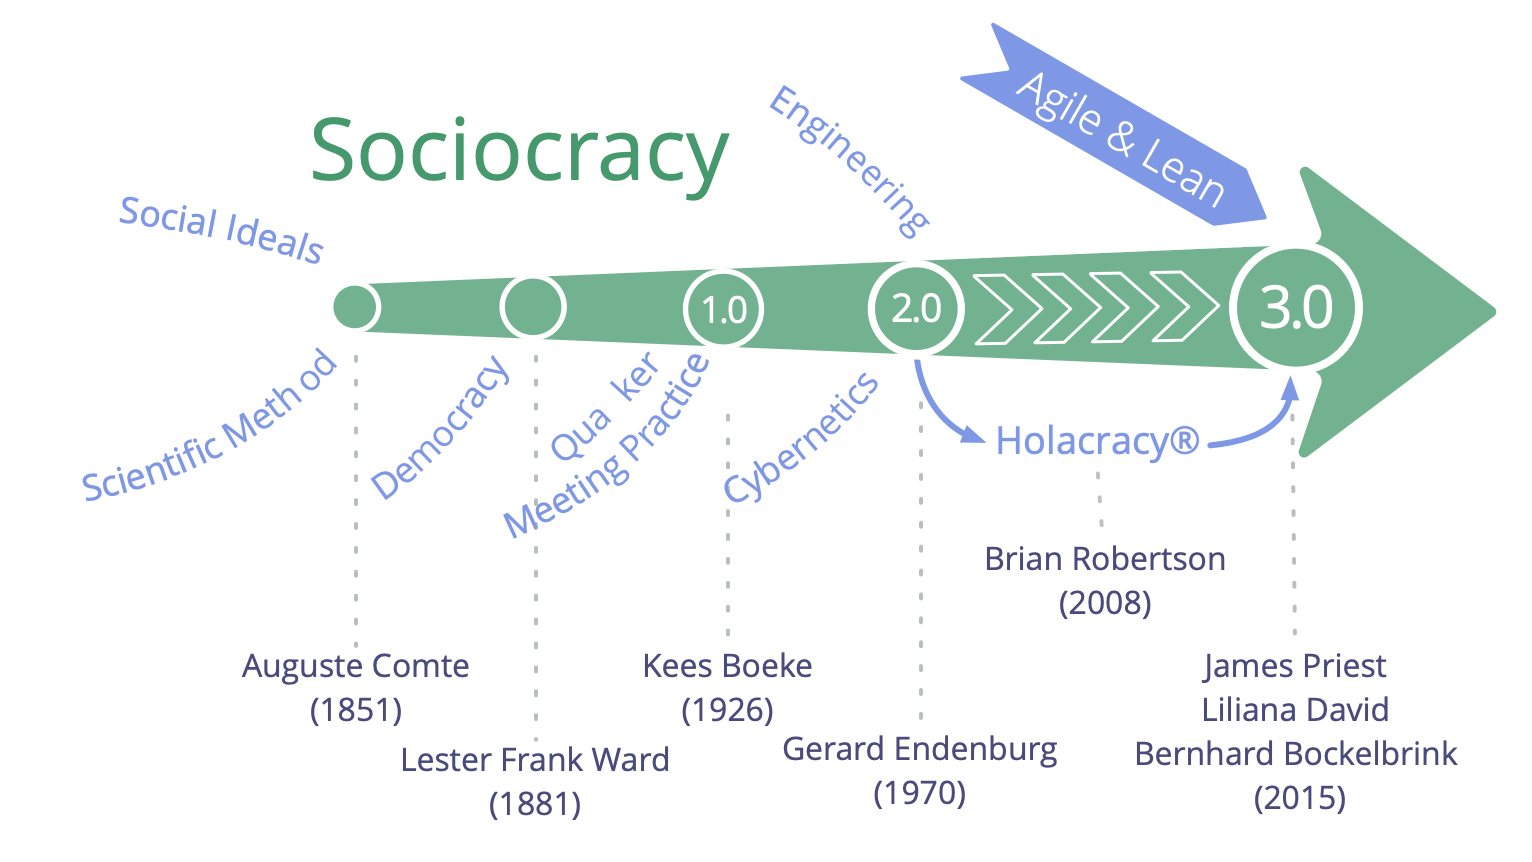 Influences and history of Sociocracy 3.0